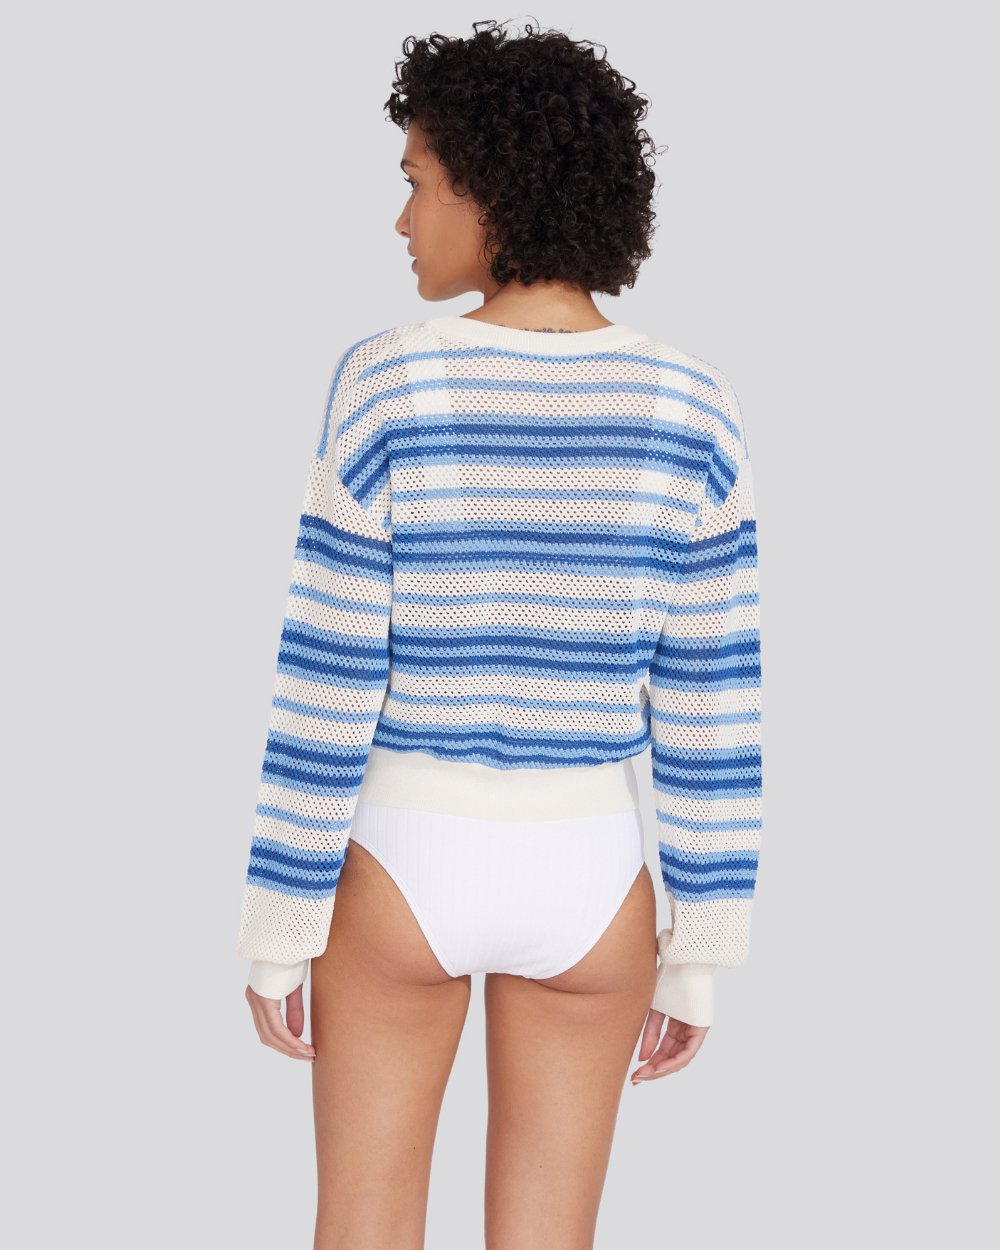 The Tobi Sweater - Solid & Striped